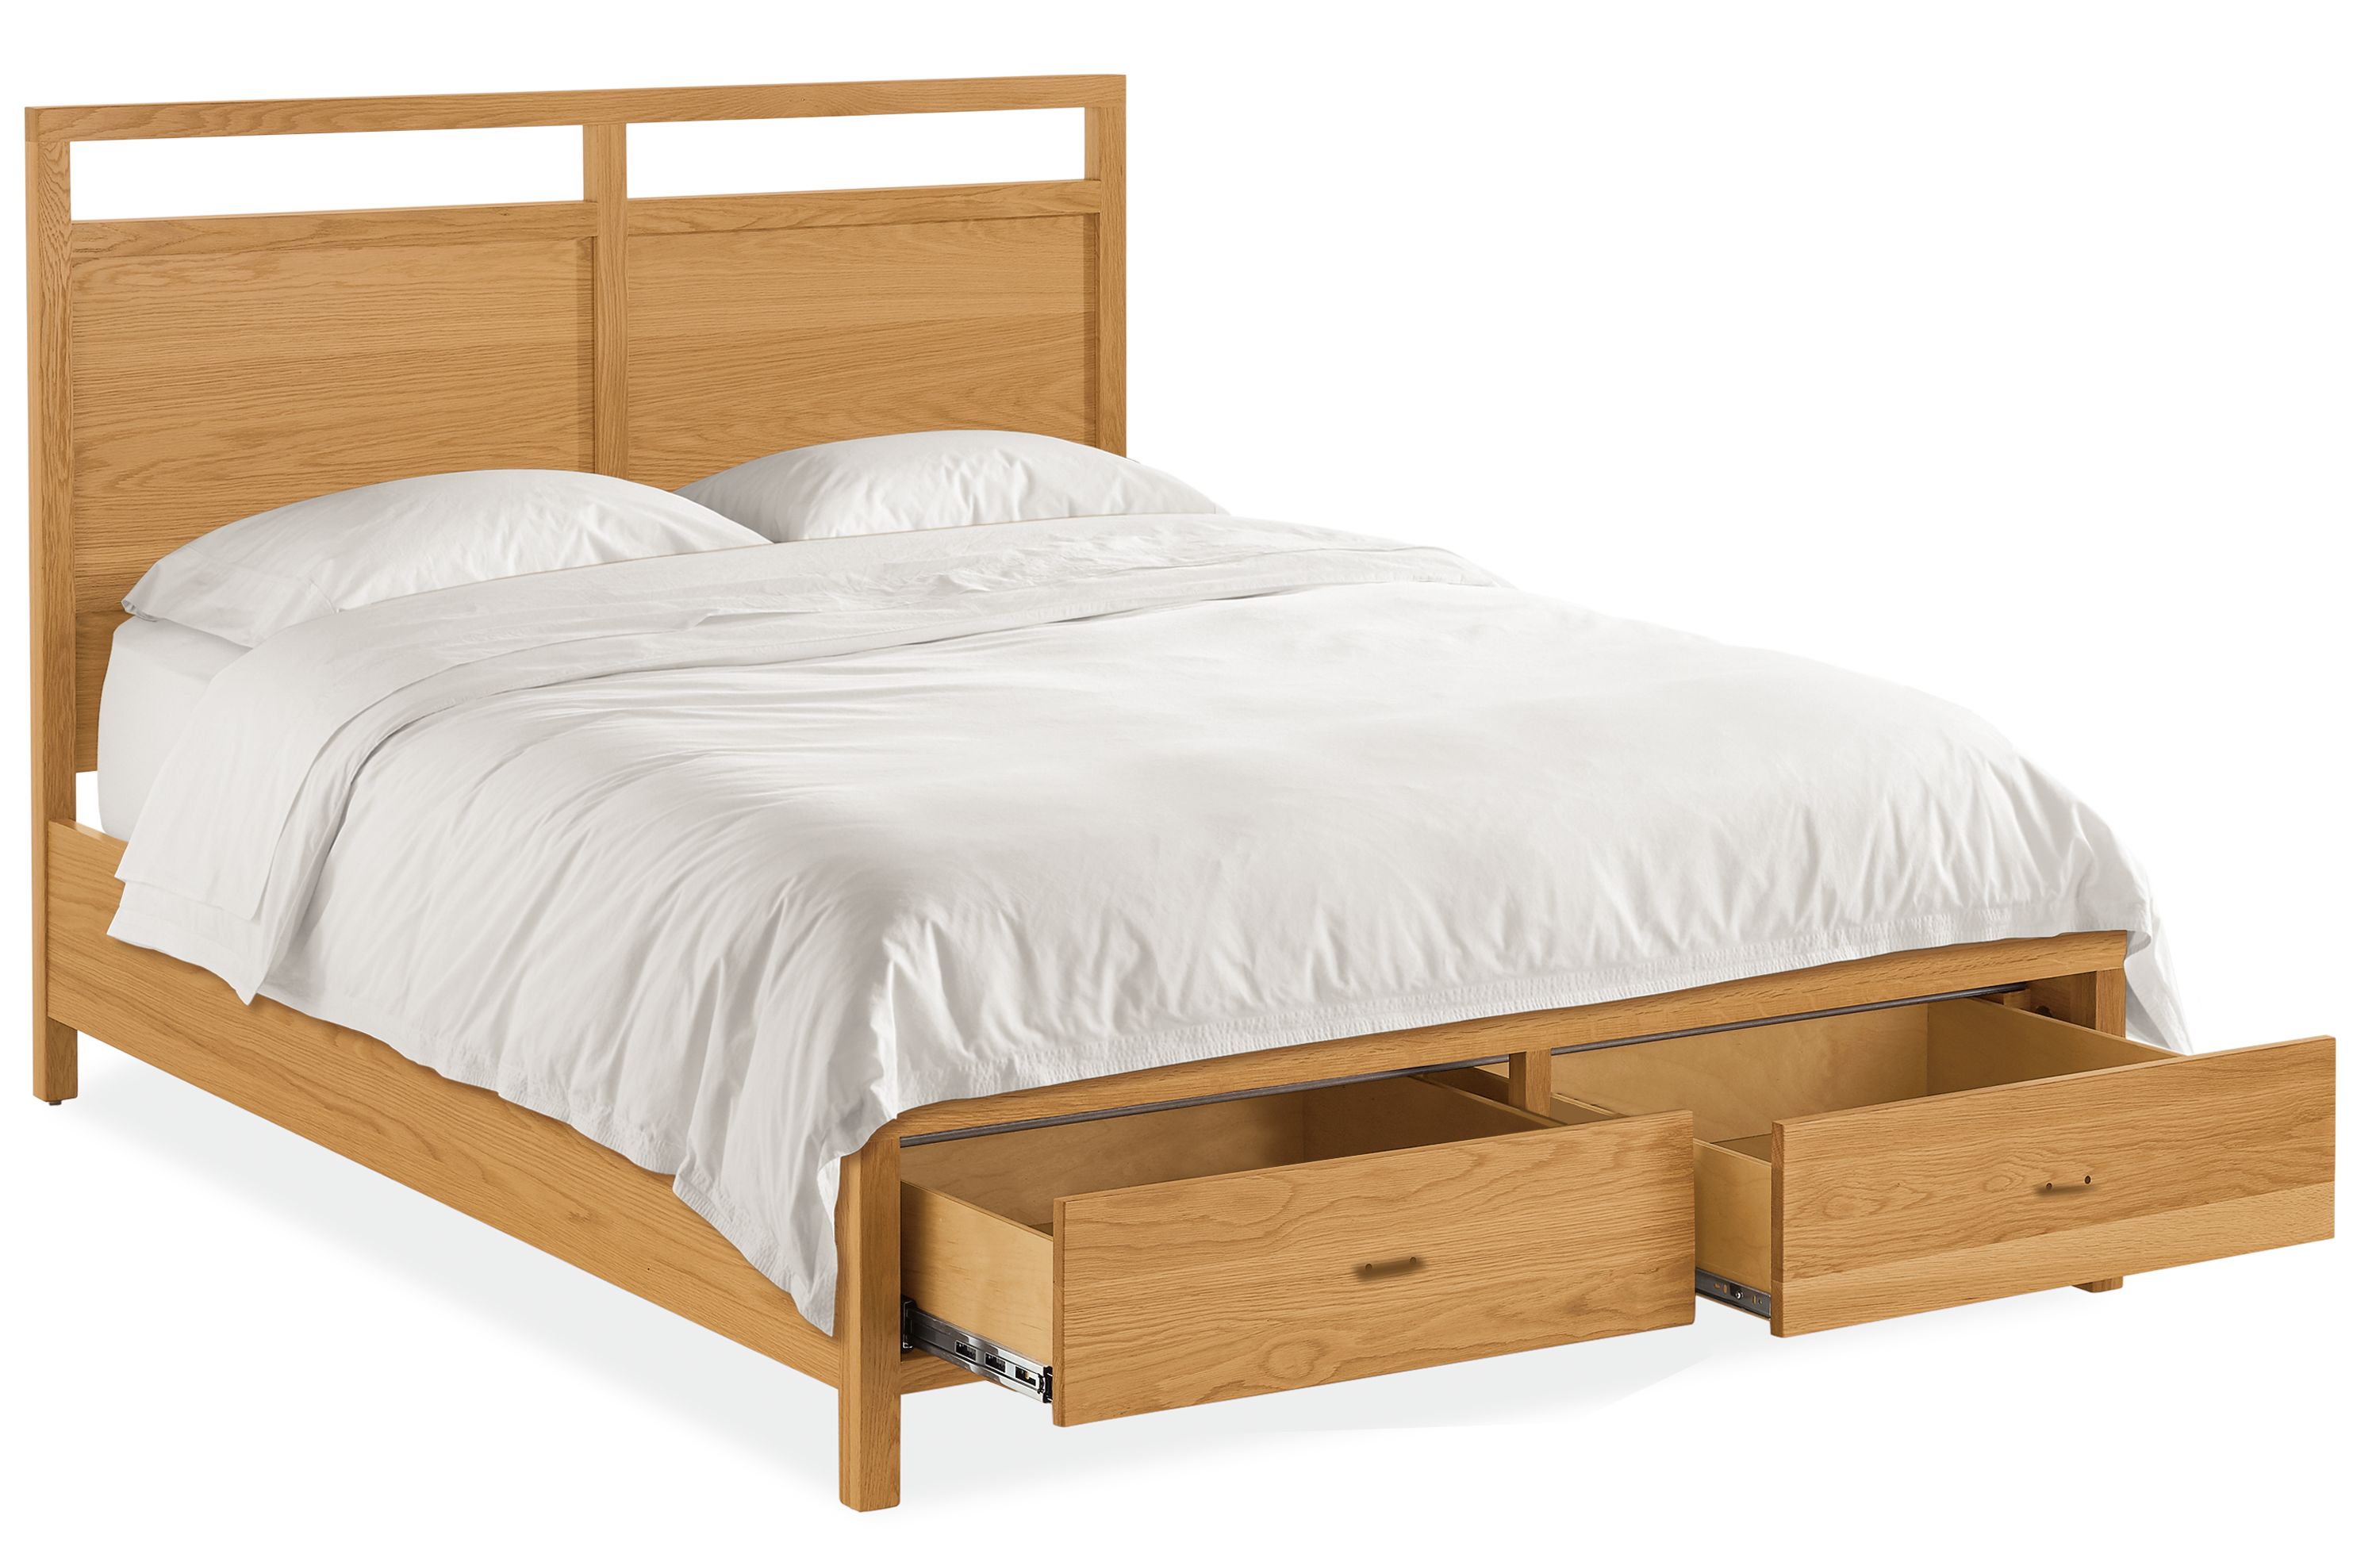 https://rnb.scene7.com/is/image/roomandboard/?layer=0&size=2400,2400&scl=1&src=383392_wood_WO&layer=1&size=2400,2400&scl=1&src=383392_pull_NS&layer=comp&$prodzoom0$